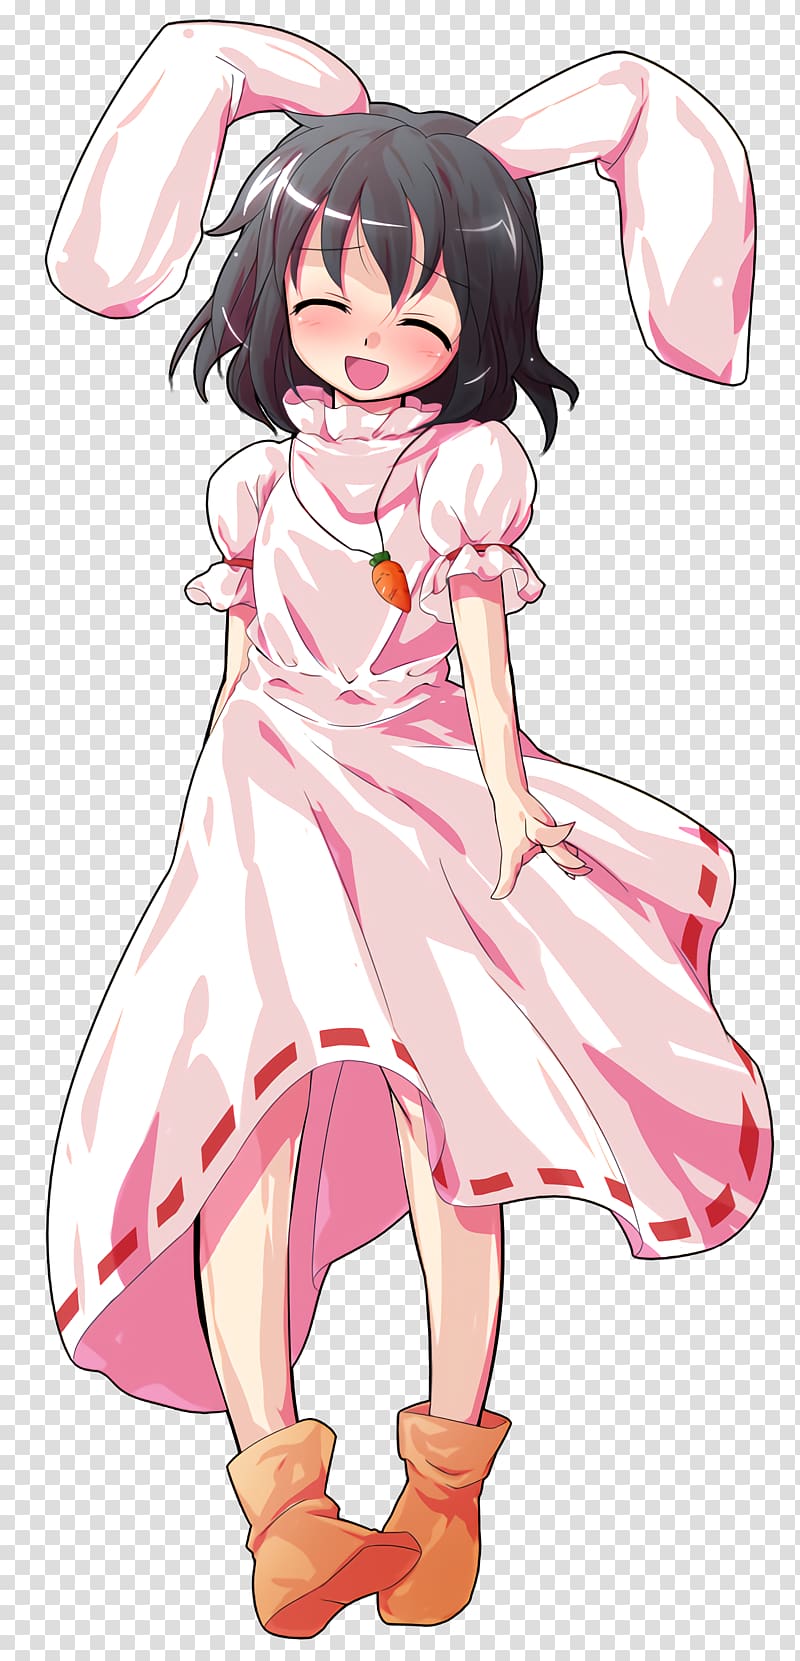 Touhou Project Tewi Inaba Team Shanghai Alice Cirno Manga, bunny ears transparent background PNG clipart